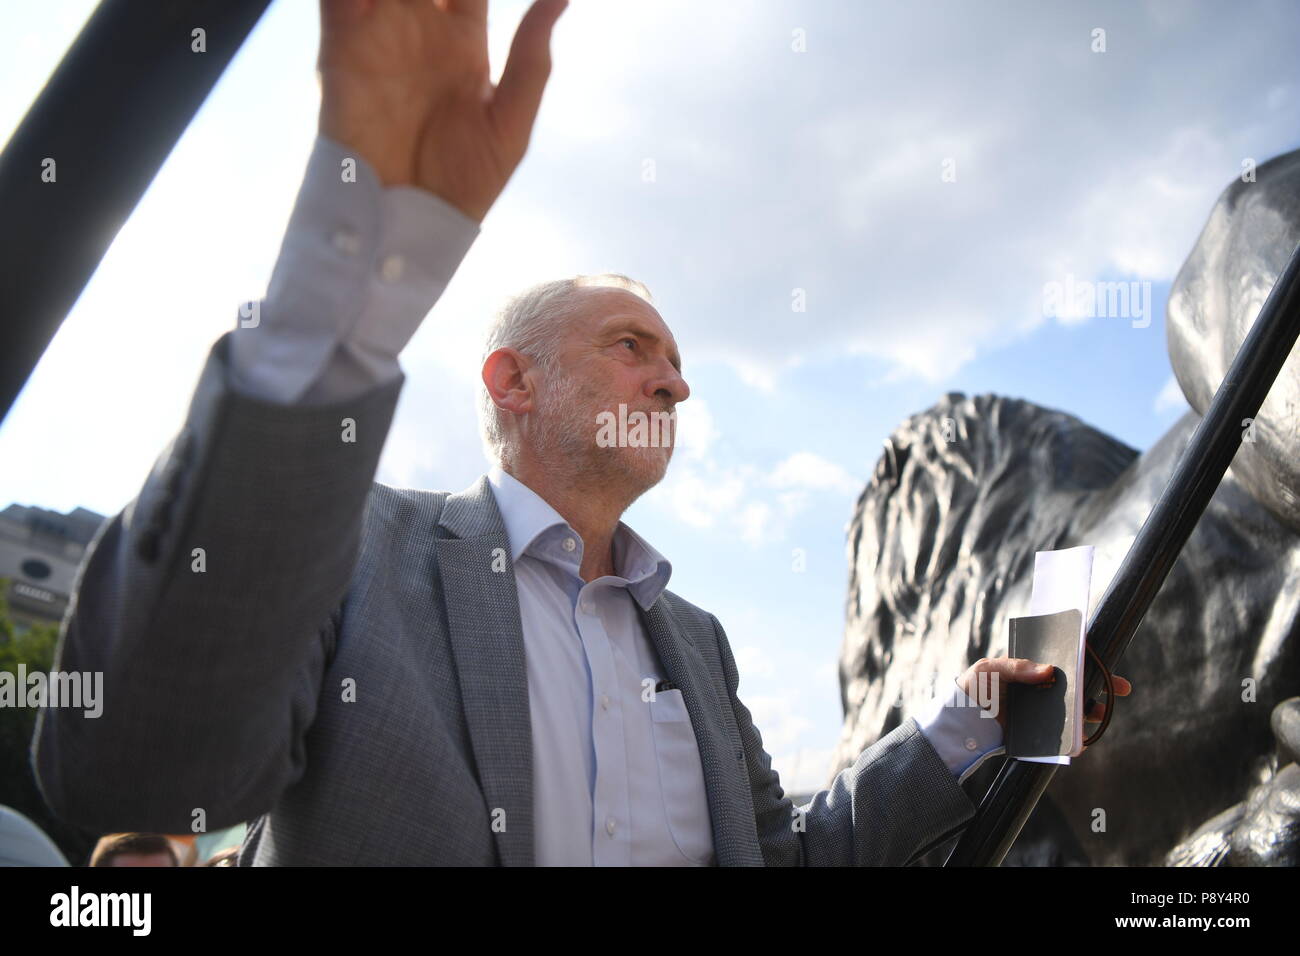 Labour leader Jeremy Corbyn joins demonstrators in London's Trafalgar Square, during protests against the visit of US President Donald Trump to the UK. Stock Photo